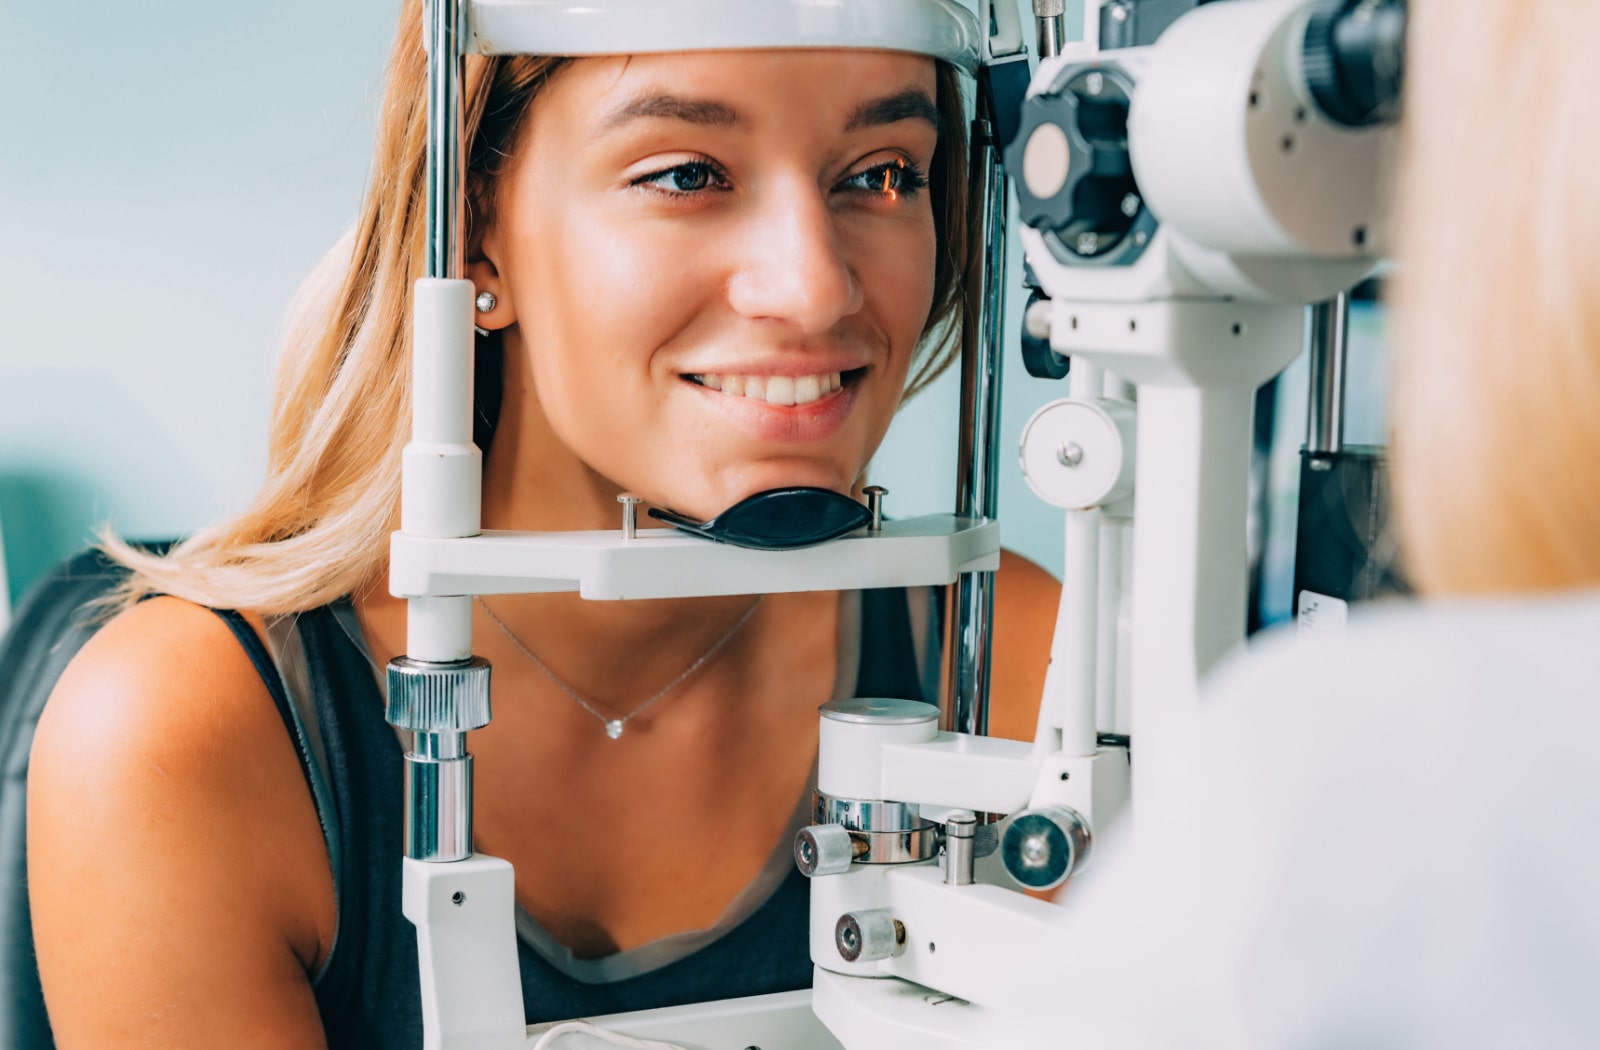 An optometrist examines a female patient's eyes during her eye exam